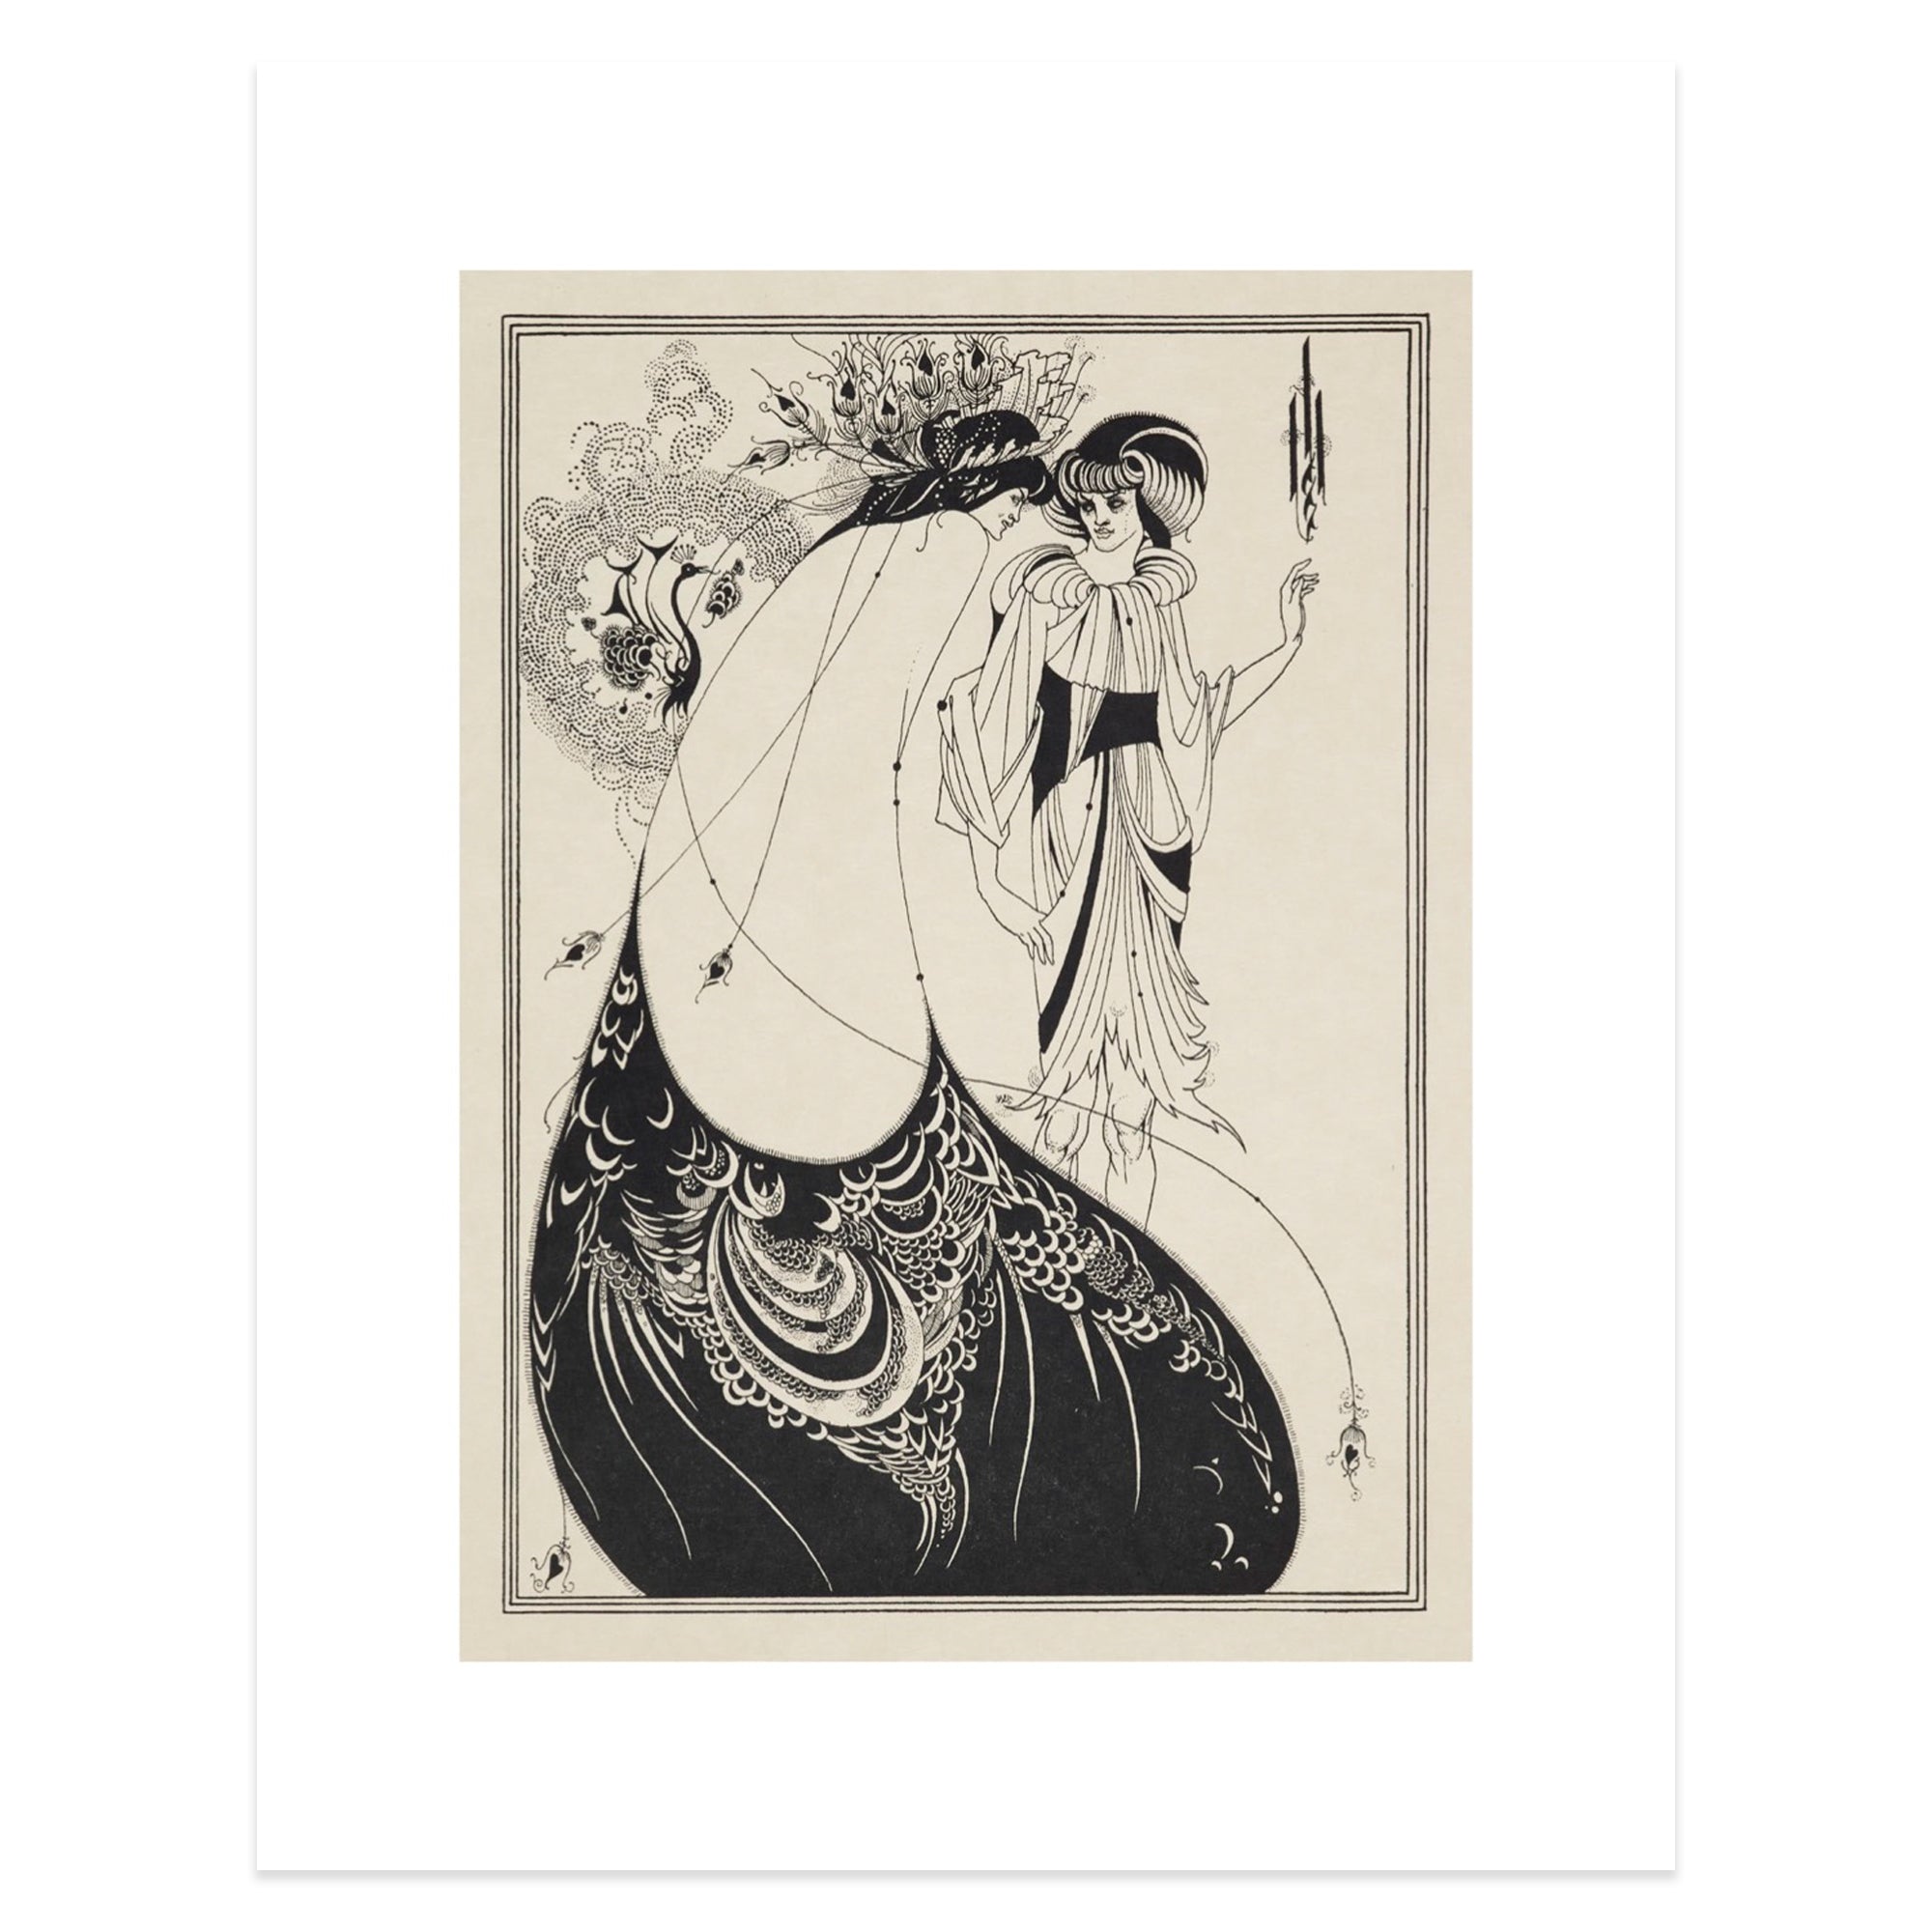 Aubrey Beardsley The Peacock Skirt repriduction. Black and cream drawing of two figures in extravagant clothing.